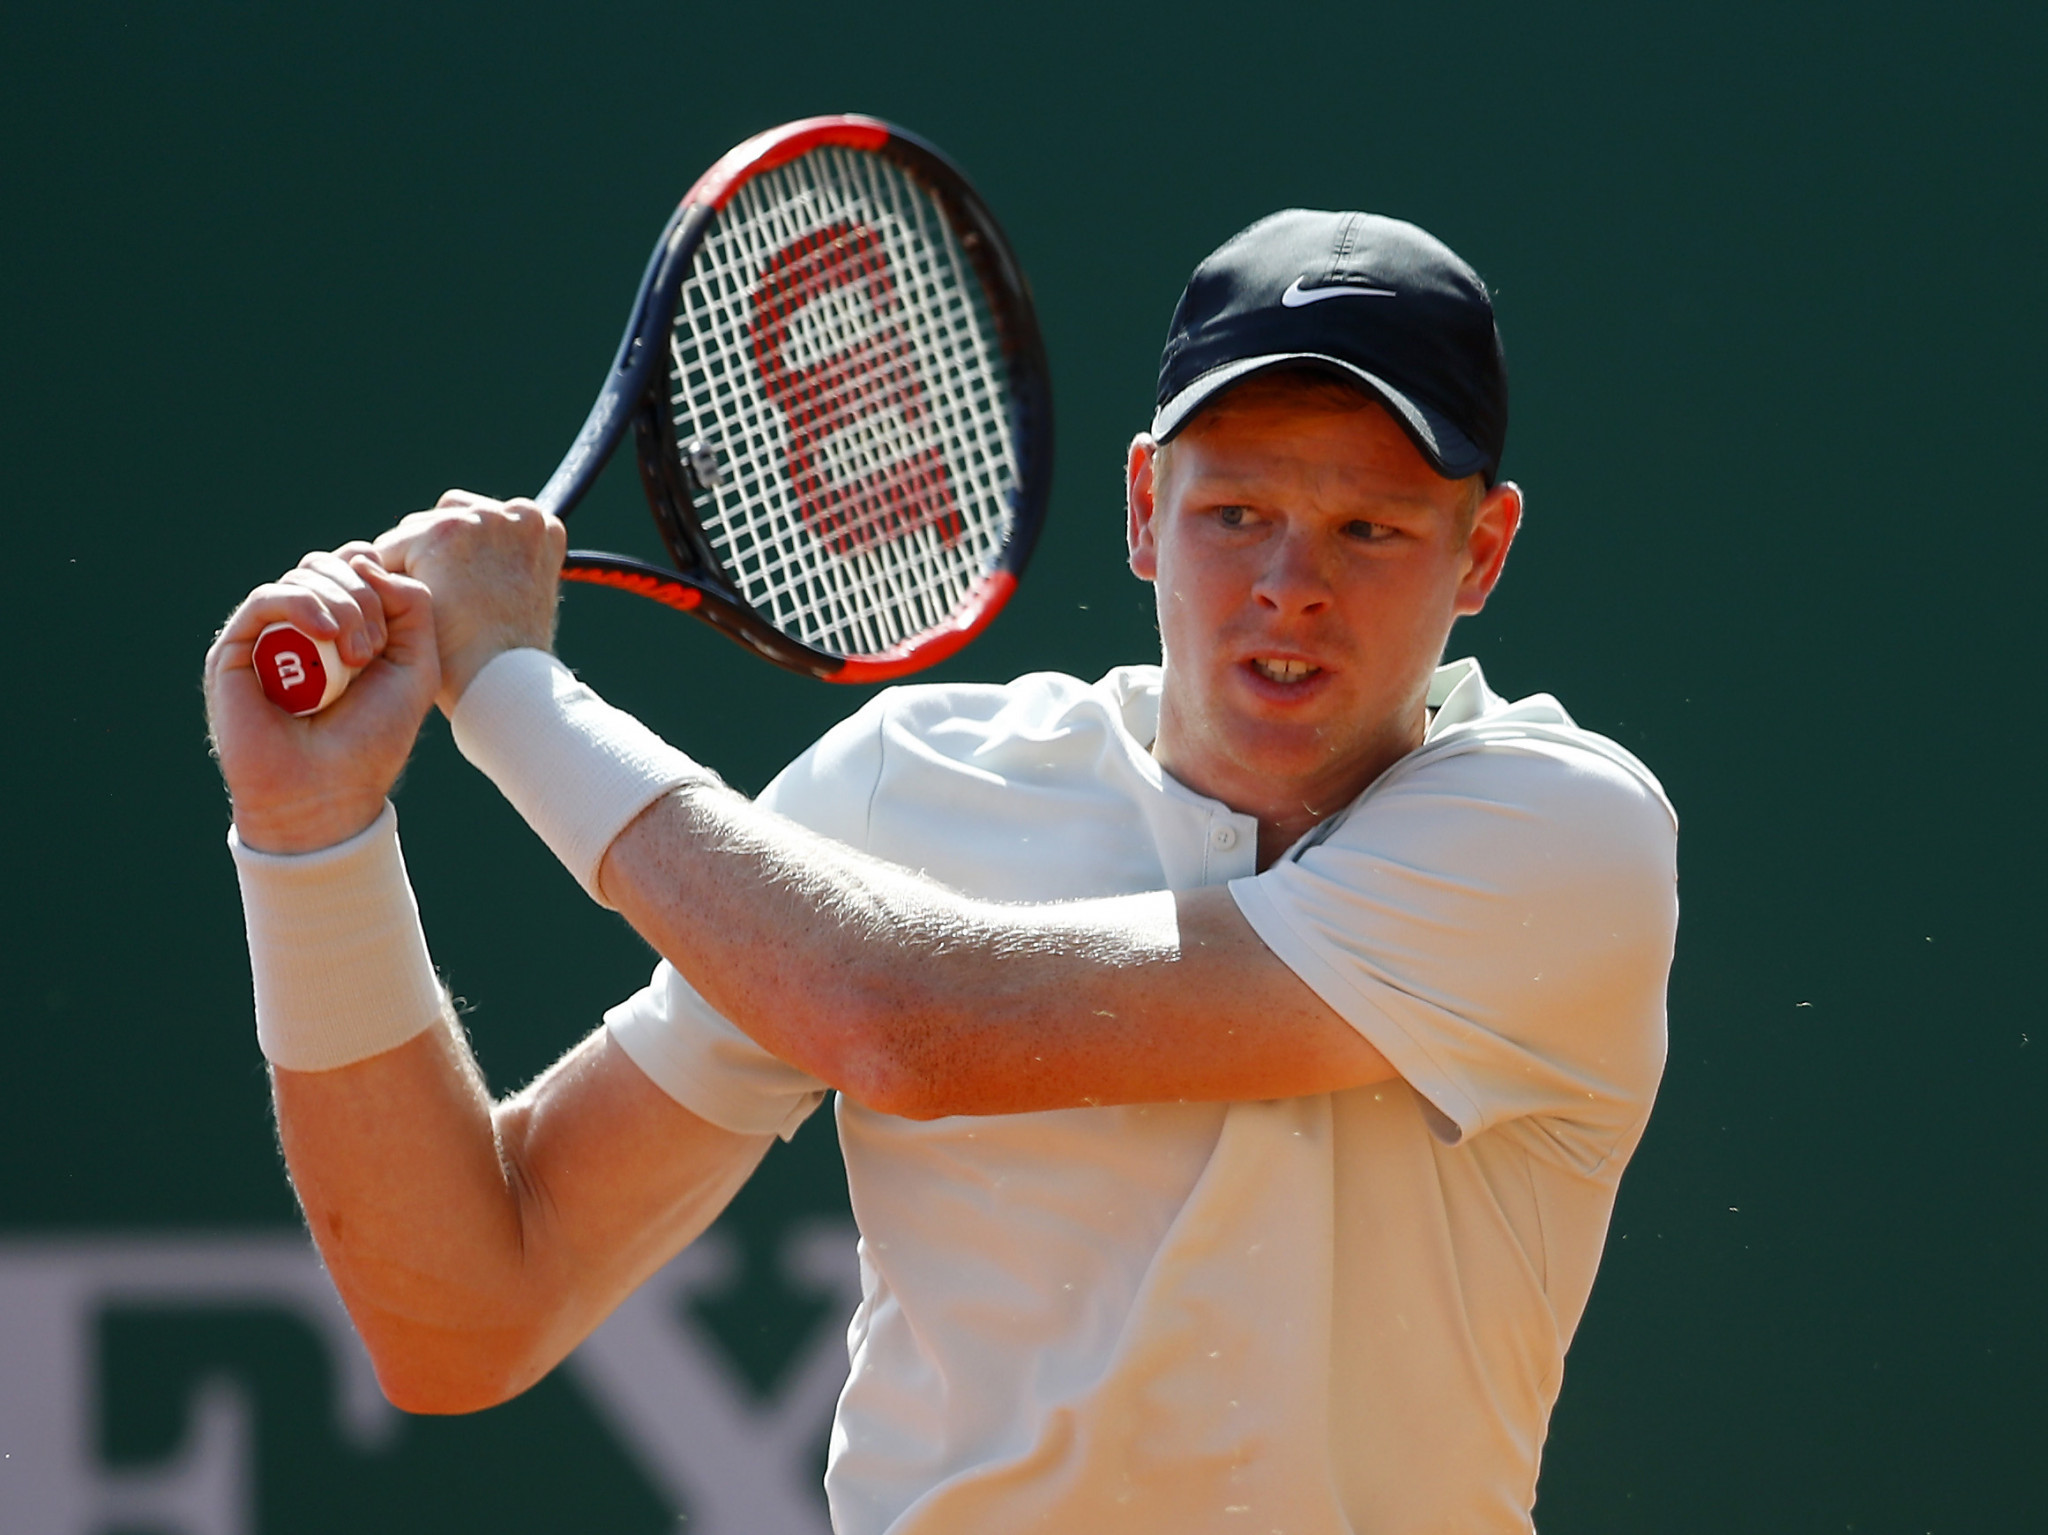 Britain's Kyle Edmund en route to a surprise early exit at the Monte Carlo Masters ©Getty Images